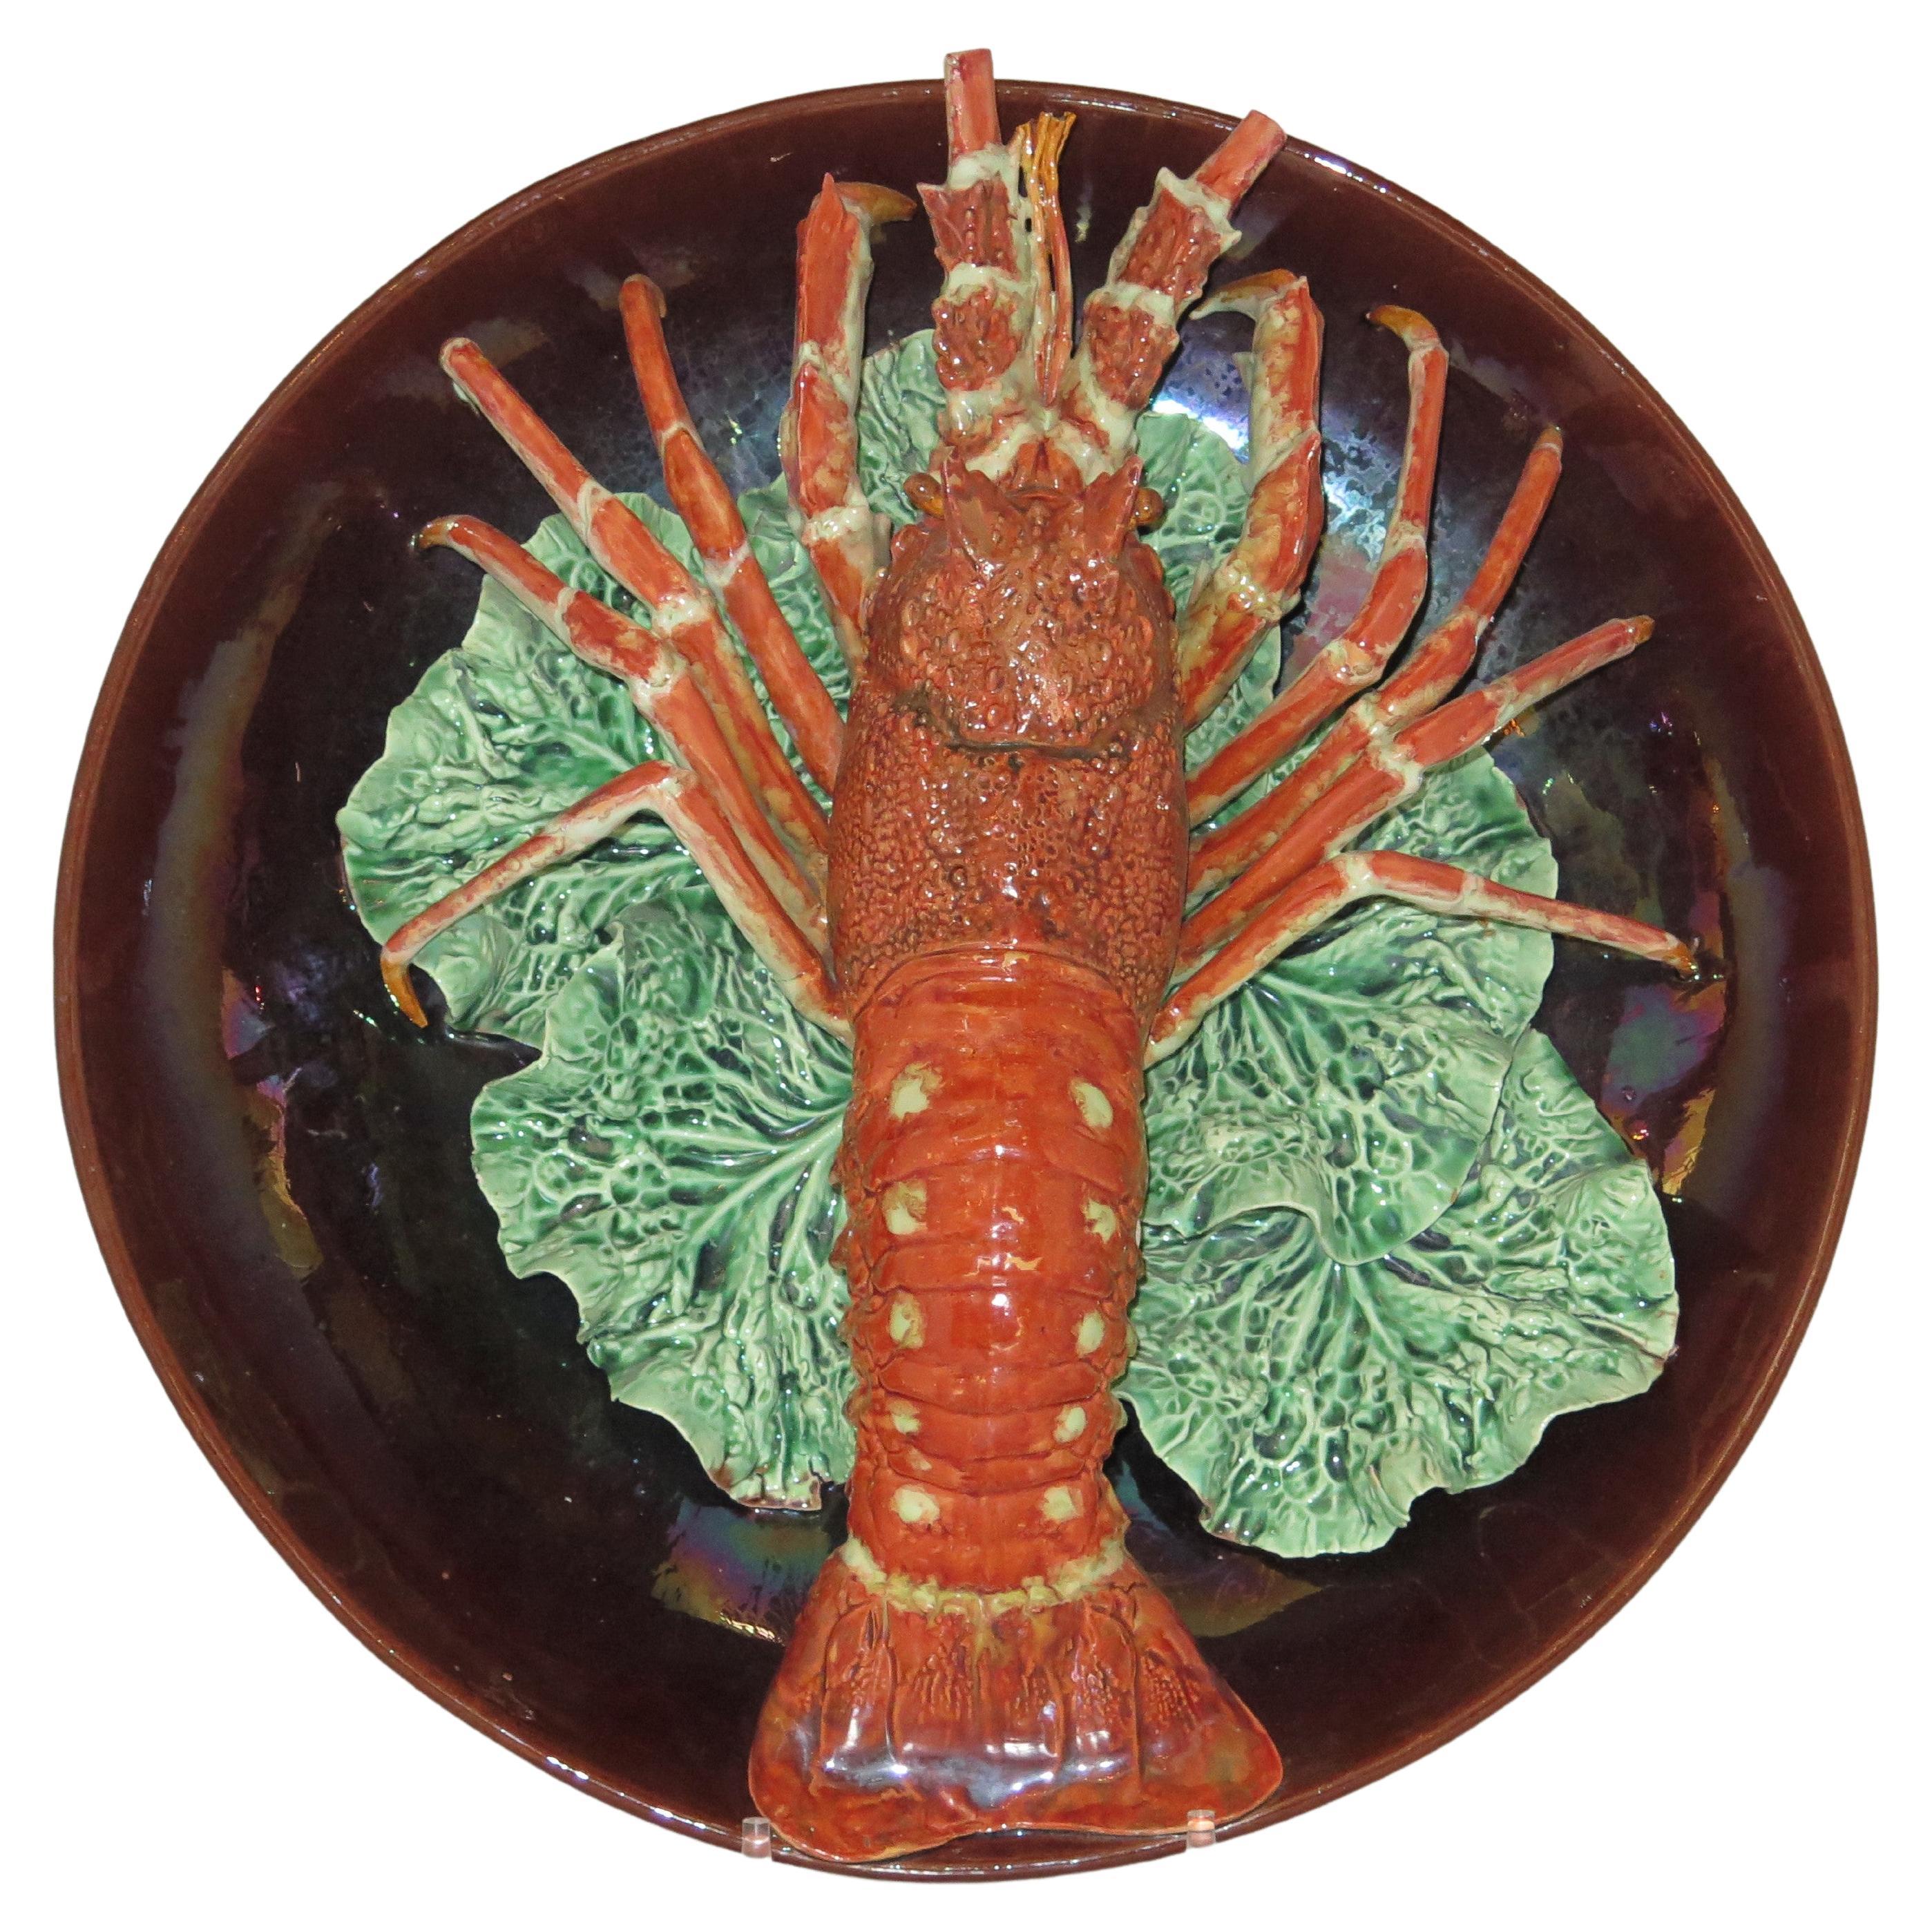 Large-Scale VERY RARE Single Lobster on Cabbage by Rafael Bordalo Pinheiro (Port